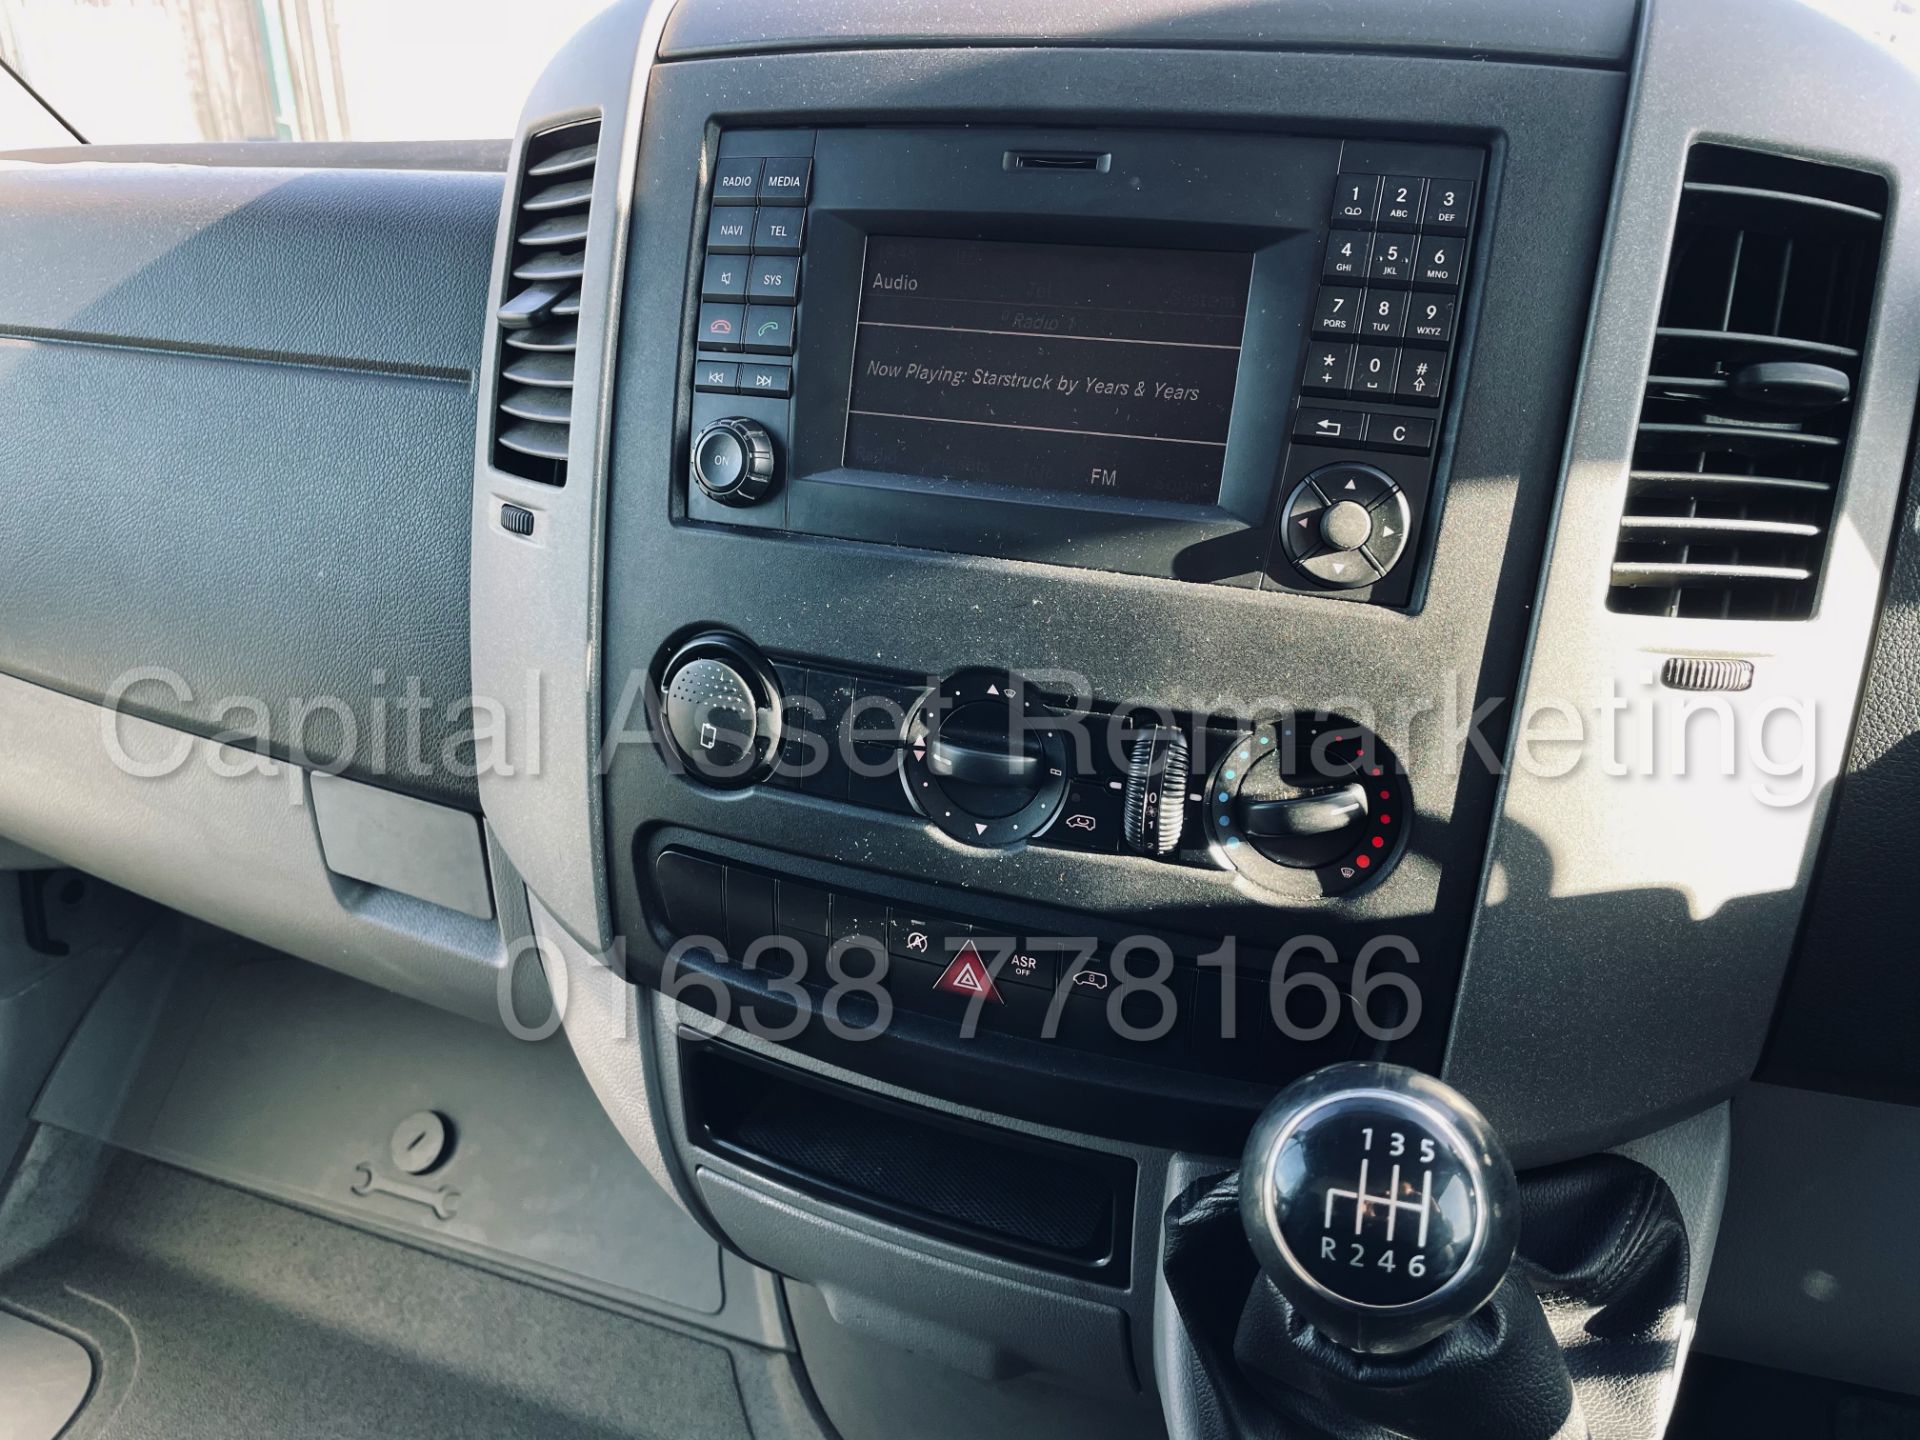 (On Sale) VOLKSWAGEN CRAFTER CR35 *LWB - CURTAIN SIDE / LUTON* (67 REG - EURO 6) '2.0 TDI - 6 SPEED' - Image 34 of 41